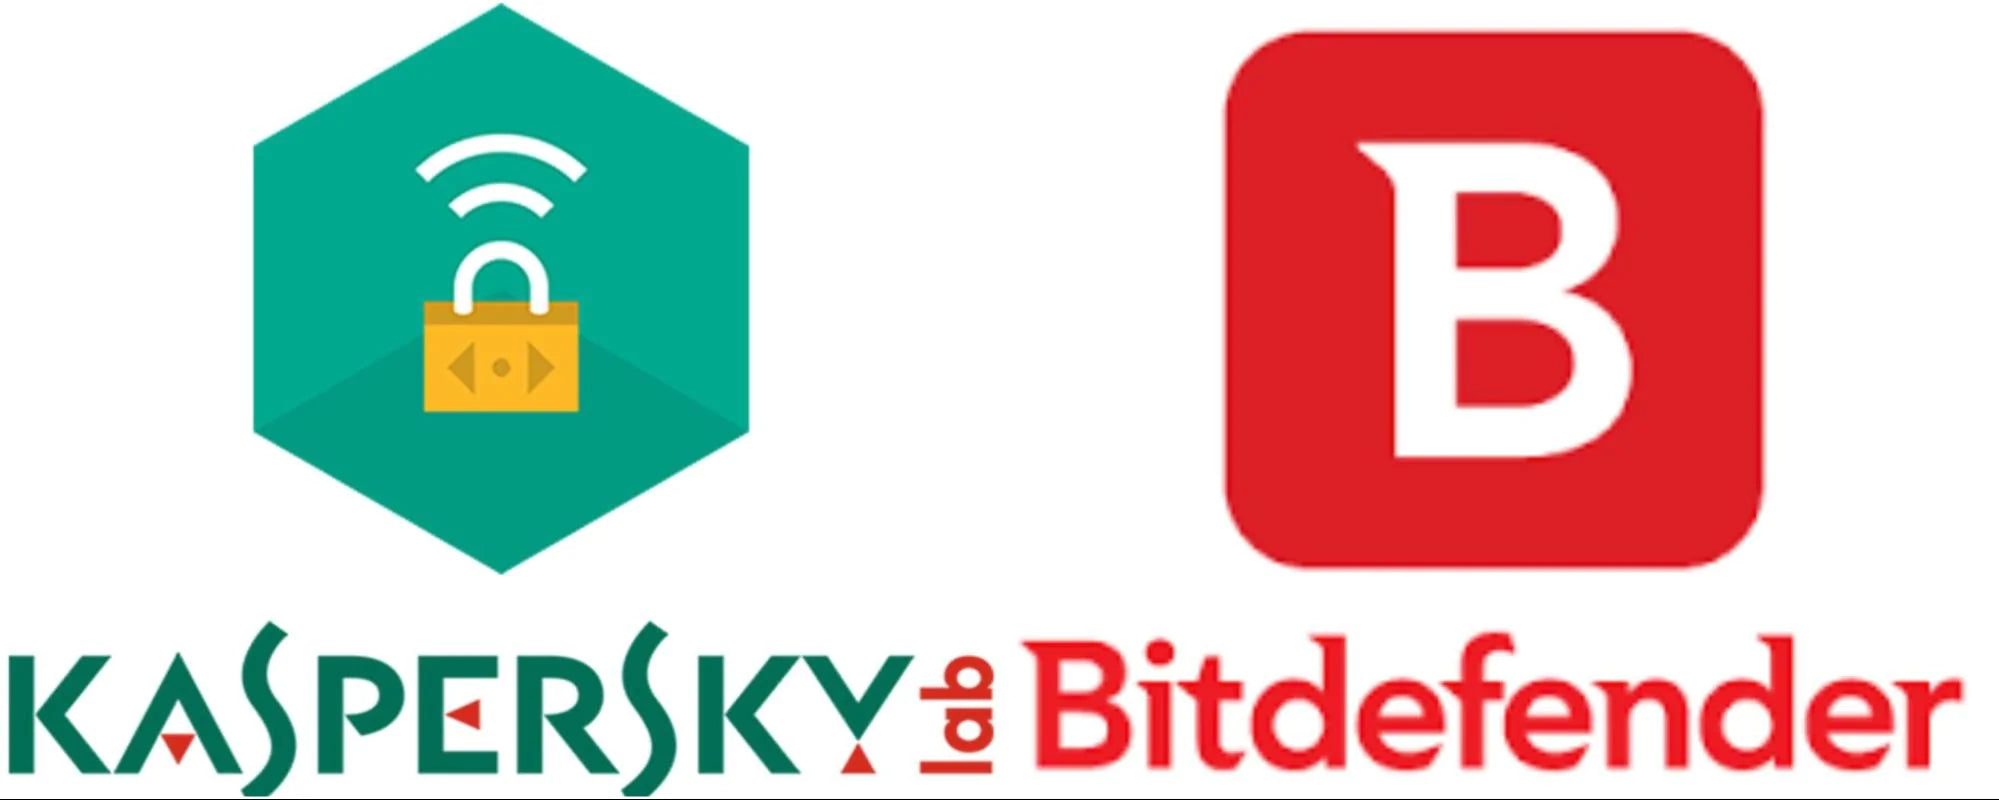 New Steam-related scams  Kaspersky official blog